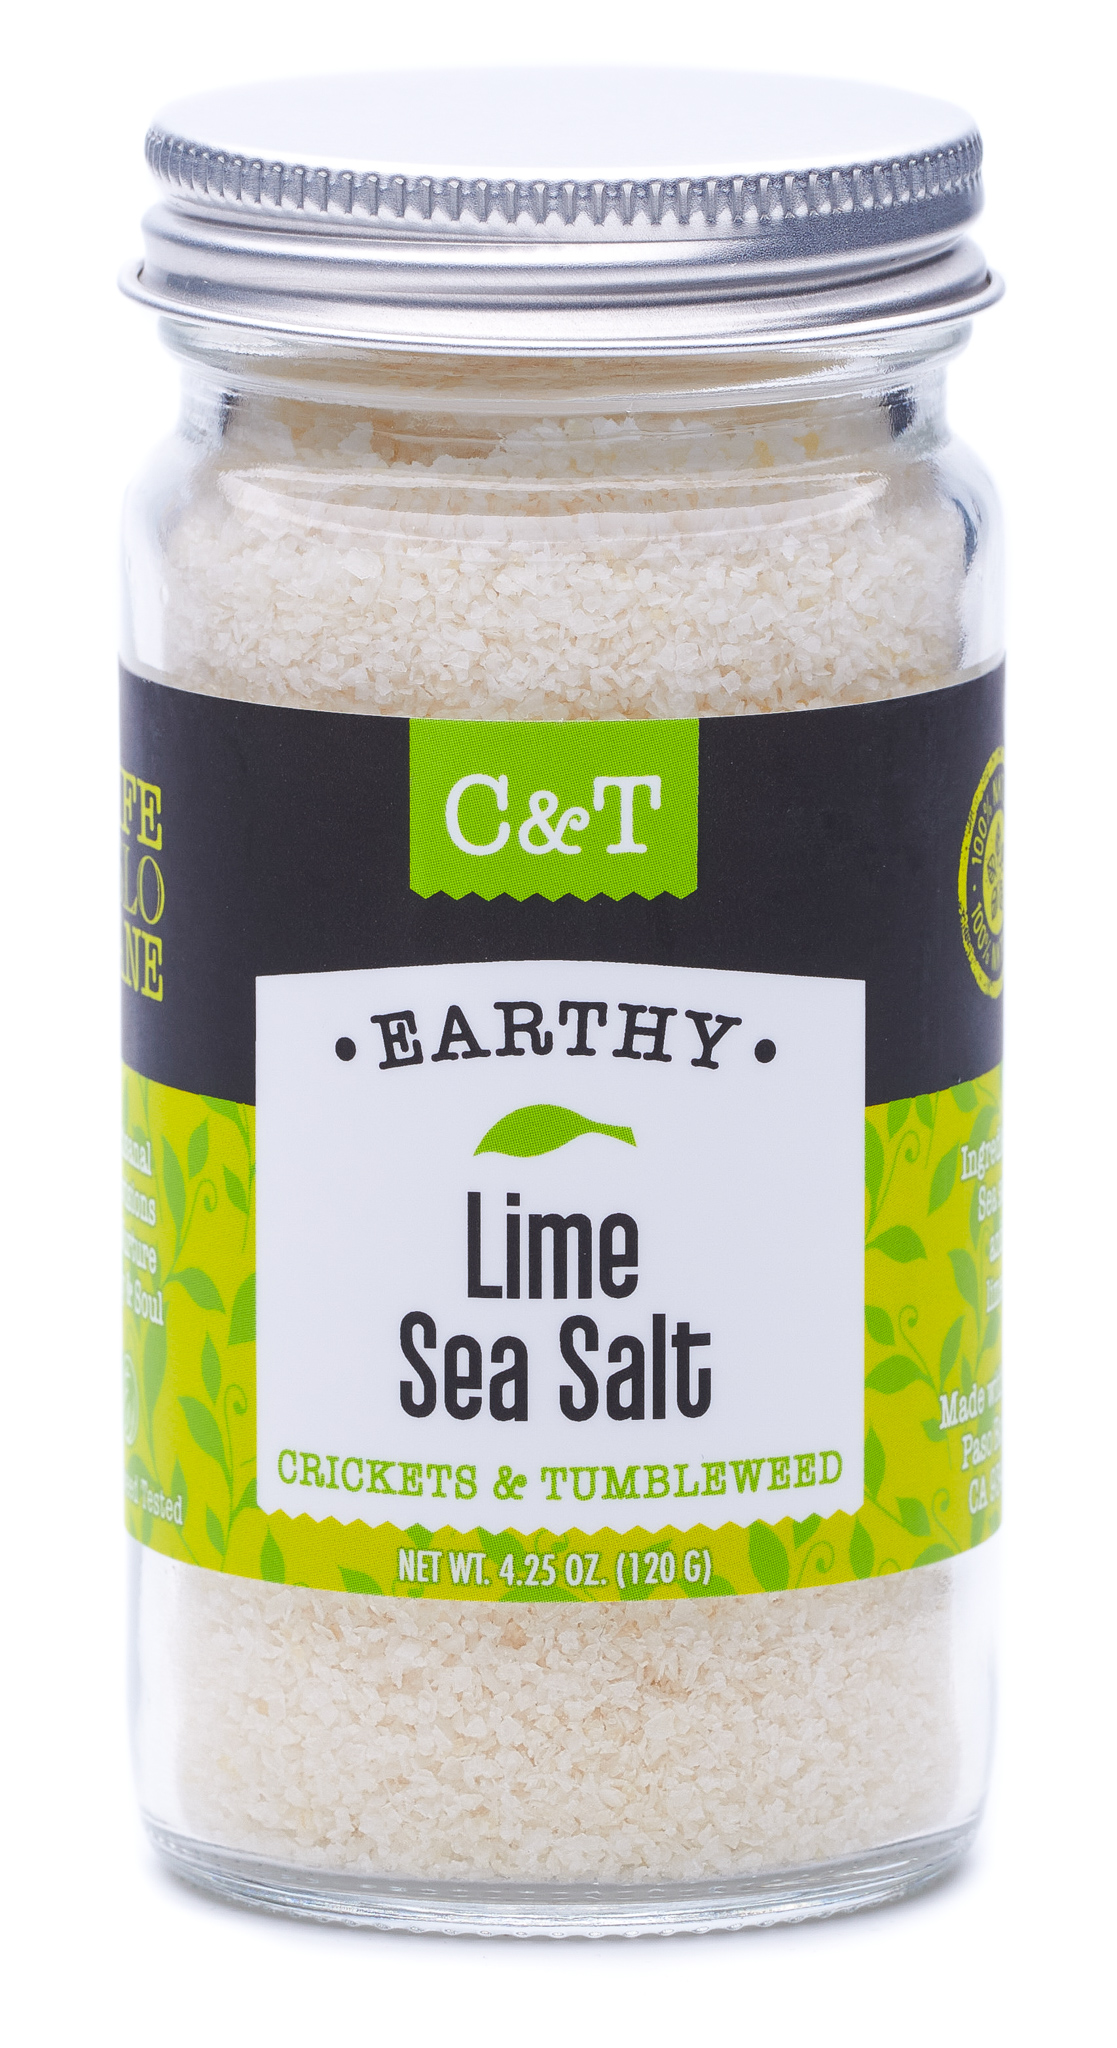 Product Image for C&T Sea Salt Lime